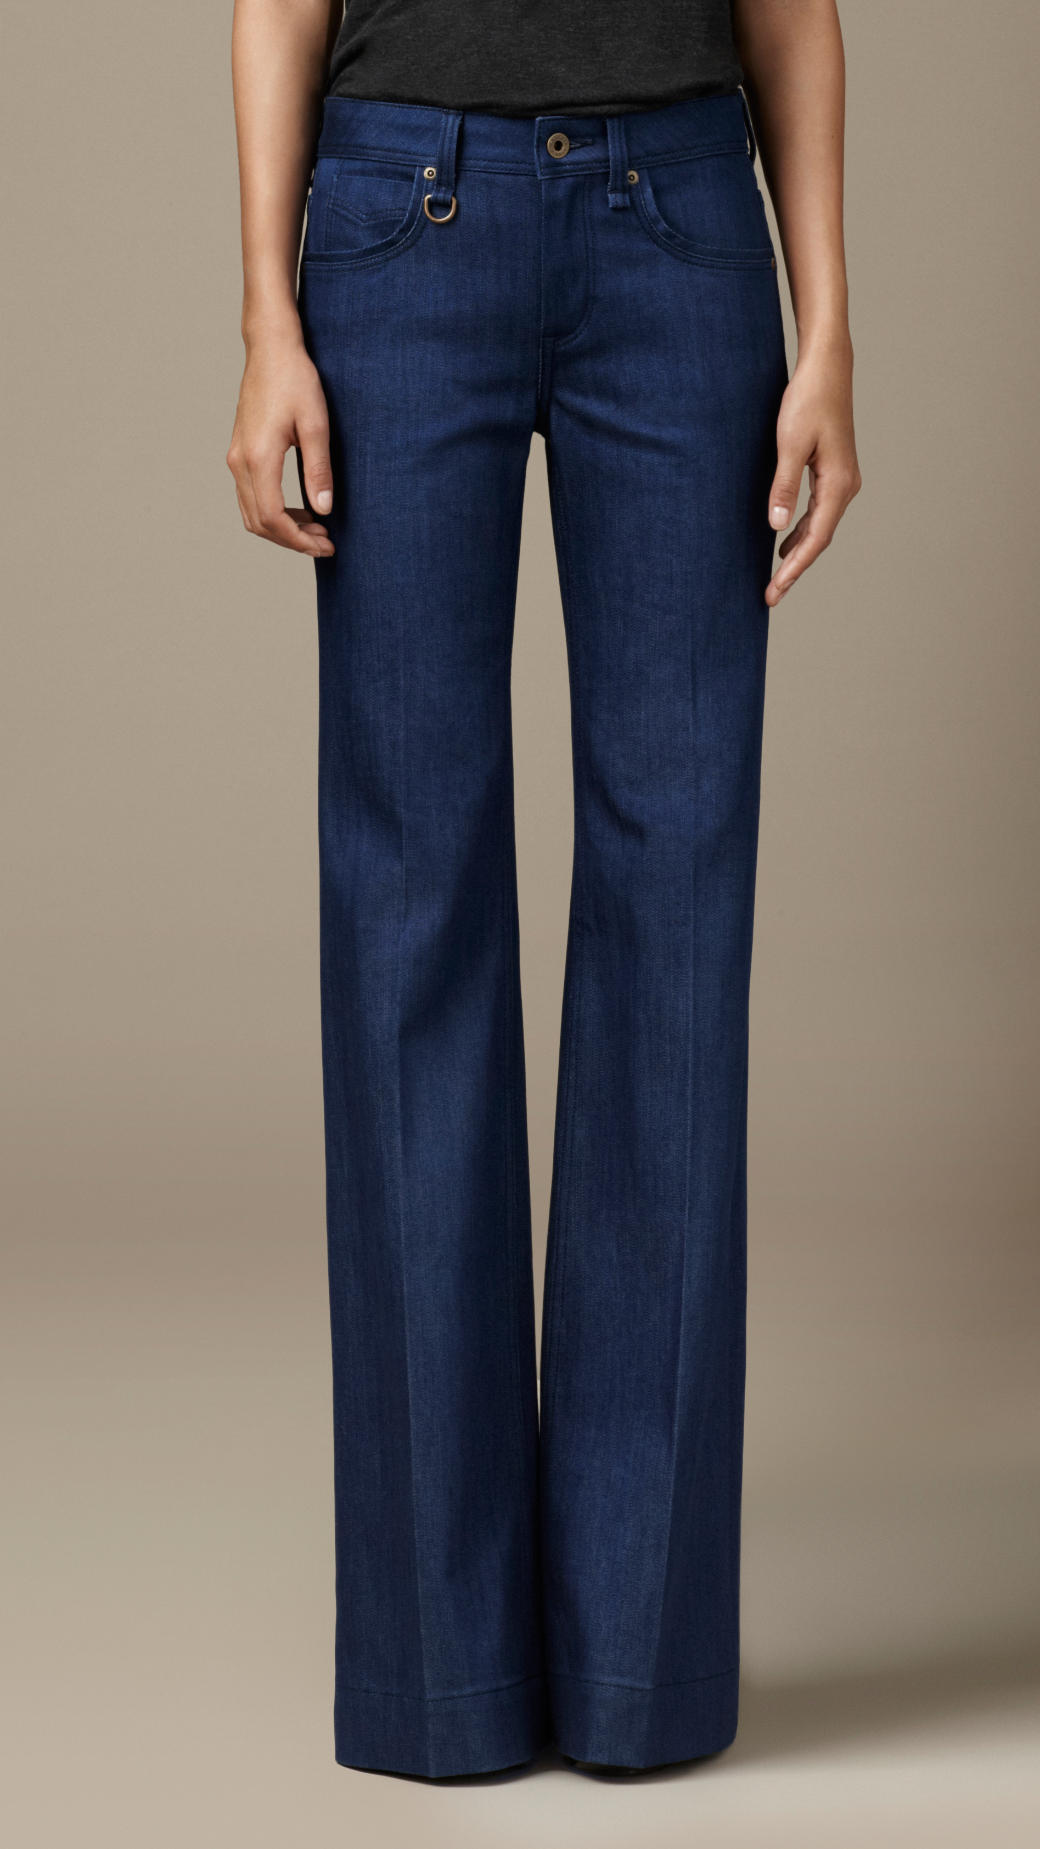 Lyst - Burberry Indigo Flare Fit Jeans in Blue